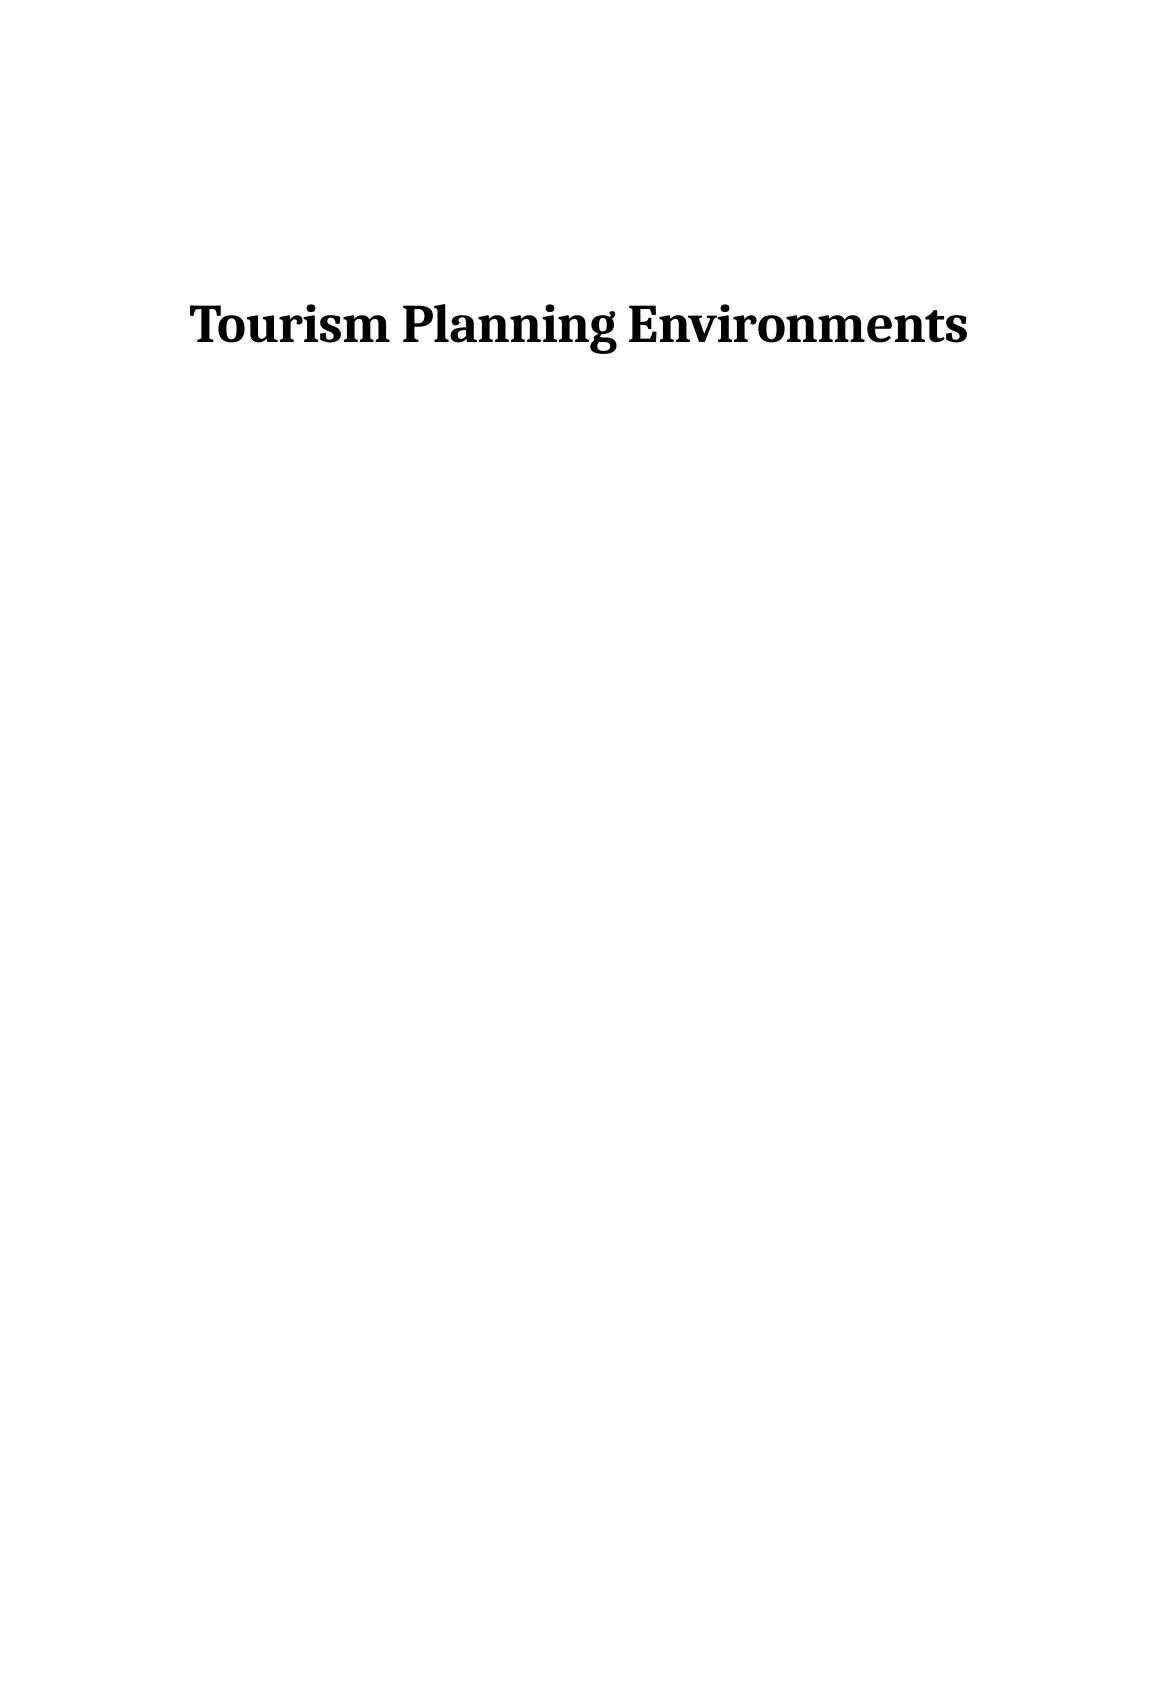 Tourism Planning Environments: Facts and figures_1